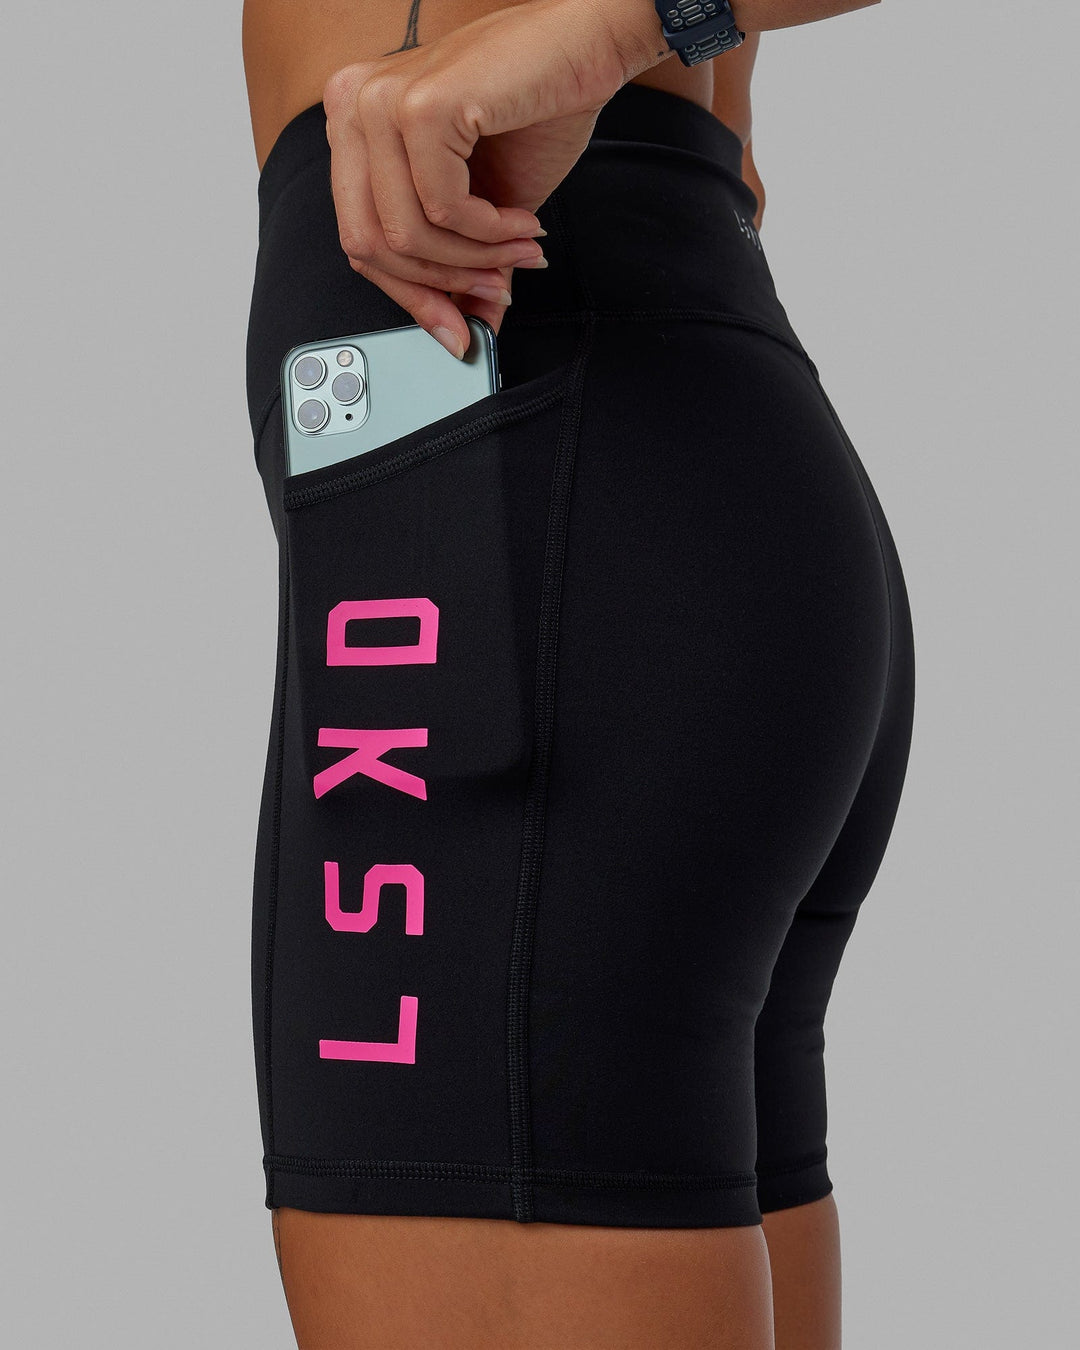 Woman wearing Rep Mid Short Tight - Black-Ultra Pink